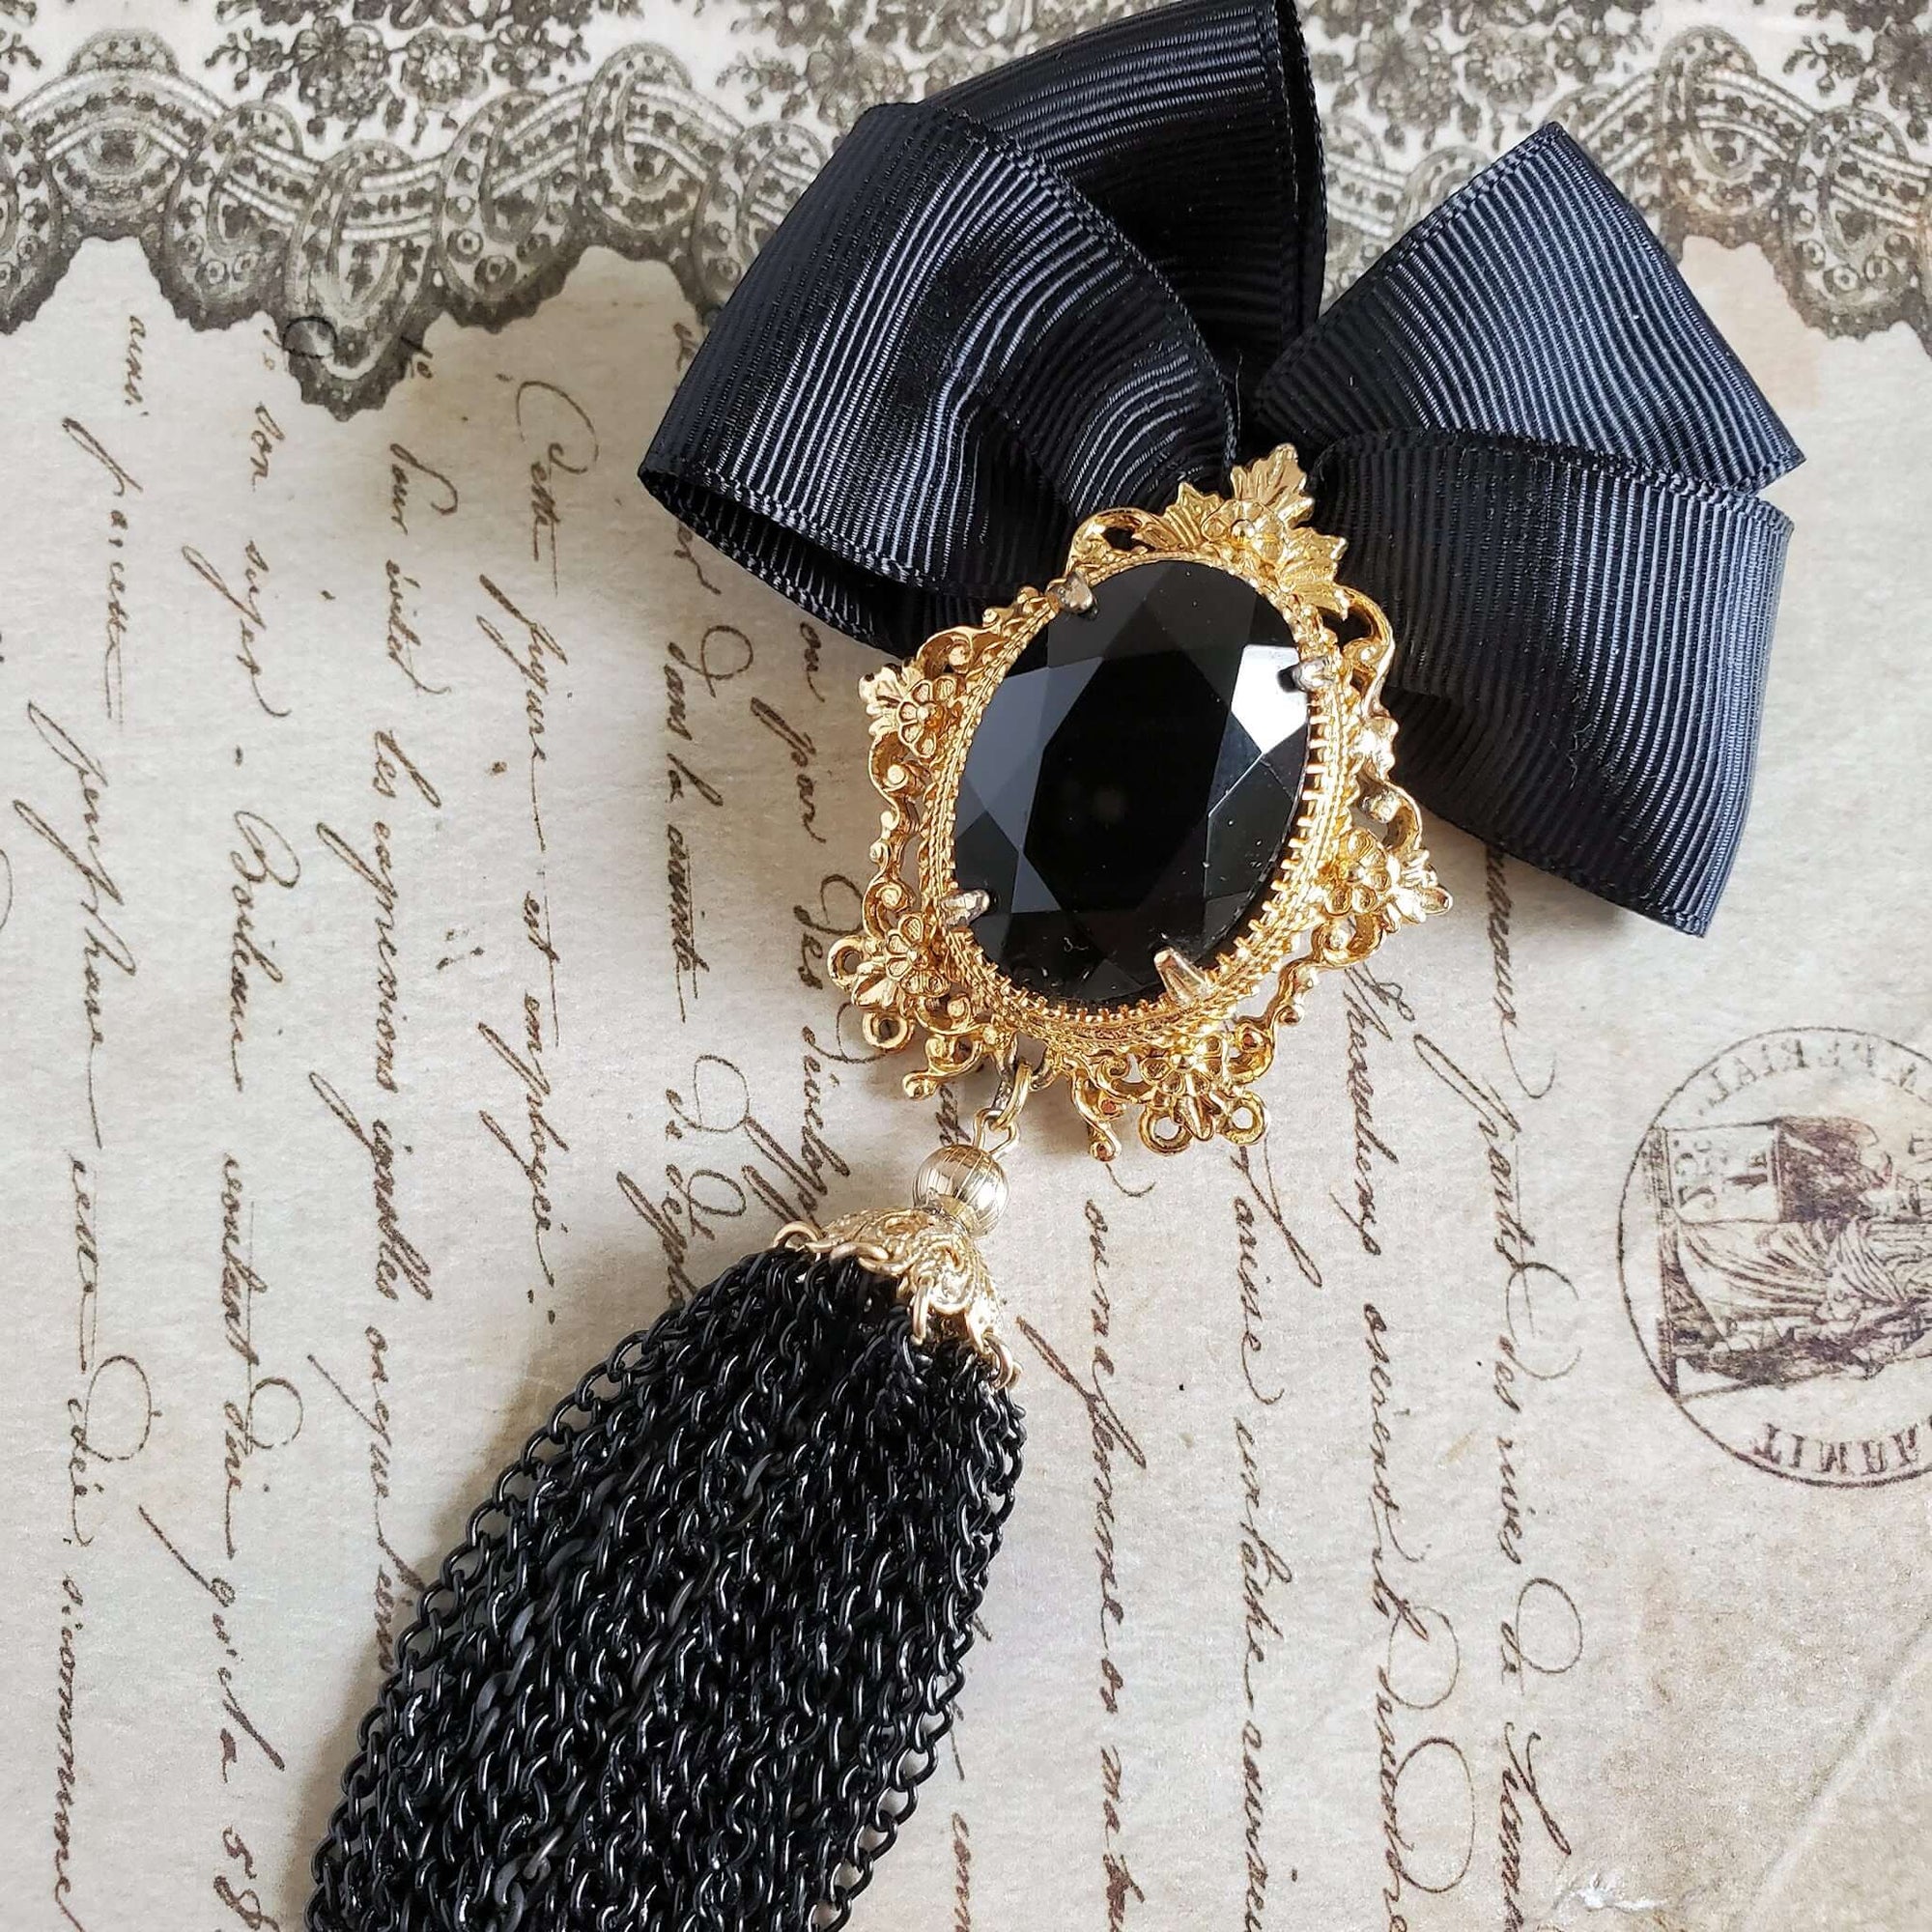 Designer brooch with black ribbon bow and a large stone set in a gold filigree setting. The brooch is finished with a black chain tassel topped with a gold bead cap.